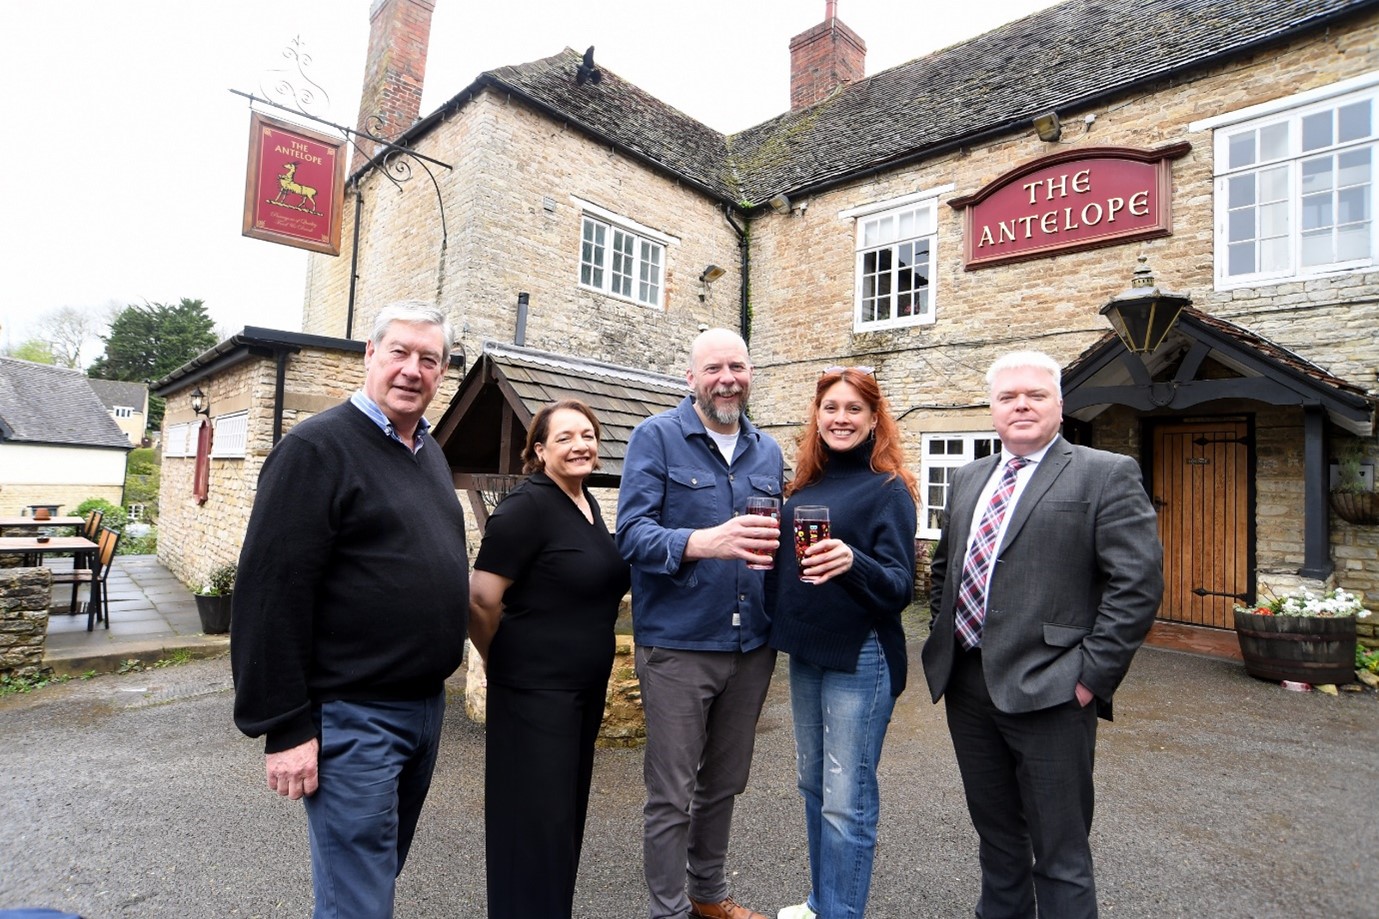 Left to right, the photograph shows Councillor Malcolm Littlewood, Marie Stephenson, Tom Lilley, Erika Lilley, Councillor Martin Watson standing outside the Antelope pub.